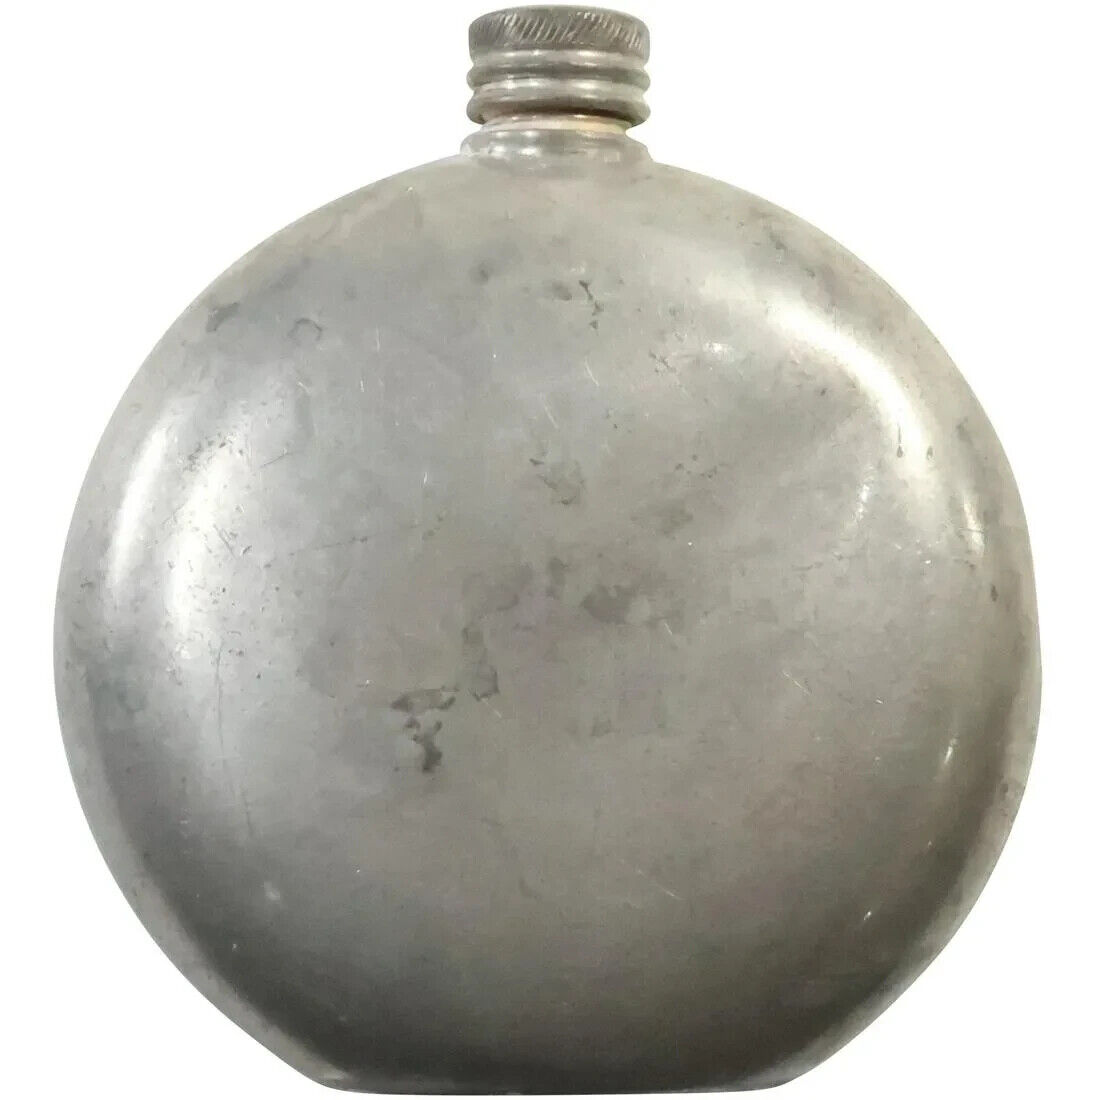 Hoffritz Early English Pewter Flask 4 oz. Made in England 3 1/2 in. x 3 1/2 in.